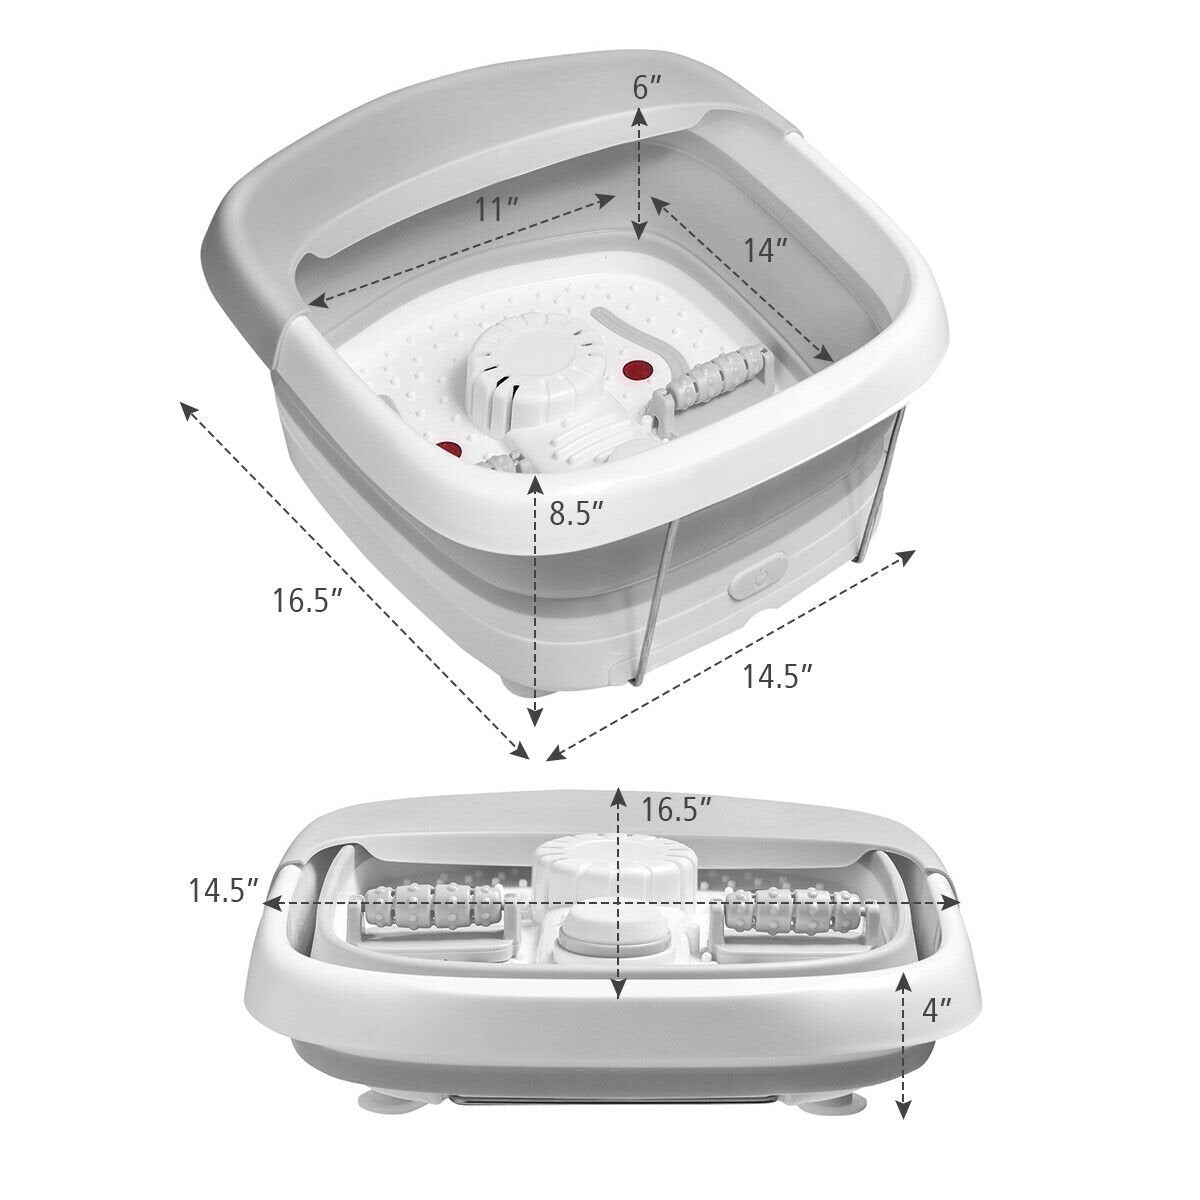 Foot Spa Bath Motorized Massager with Heat Red Light, Gray at Gallery Canada